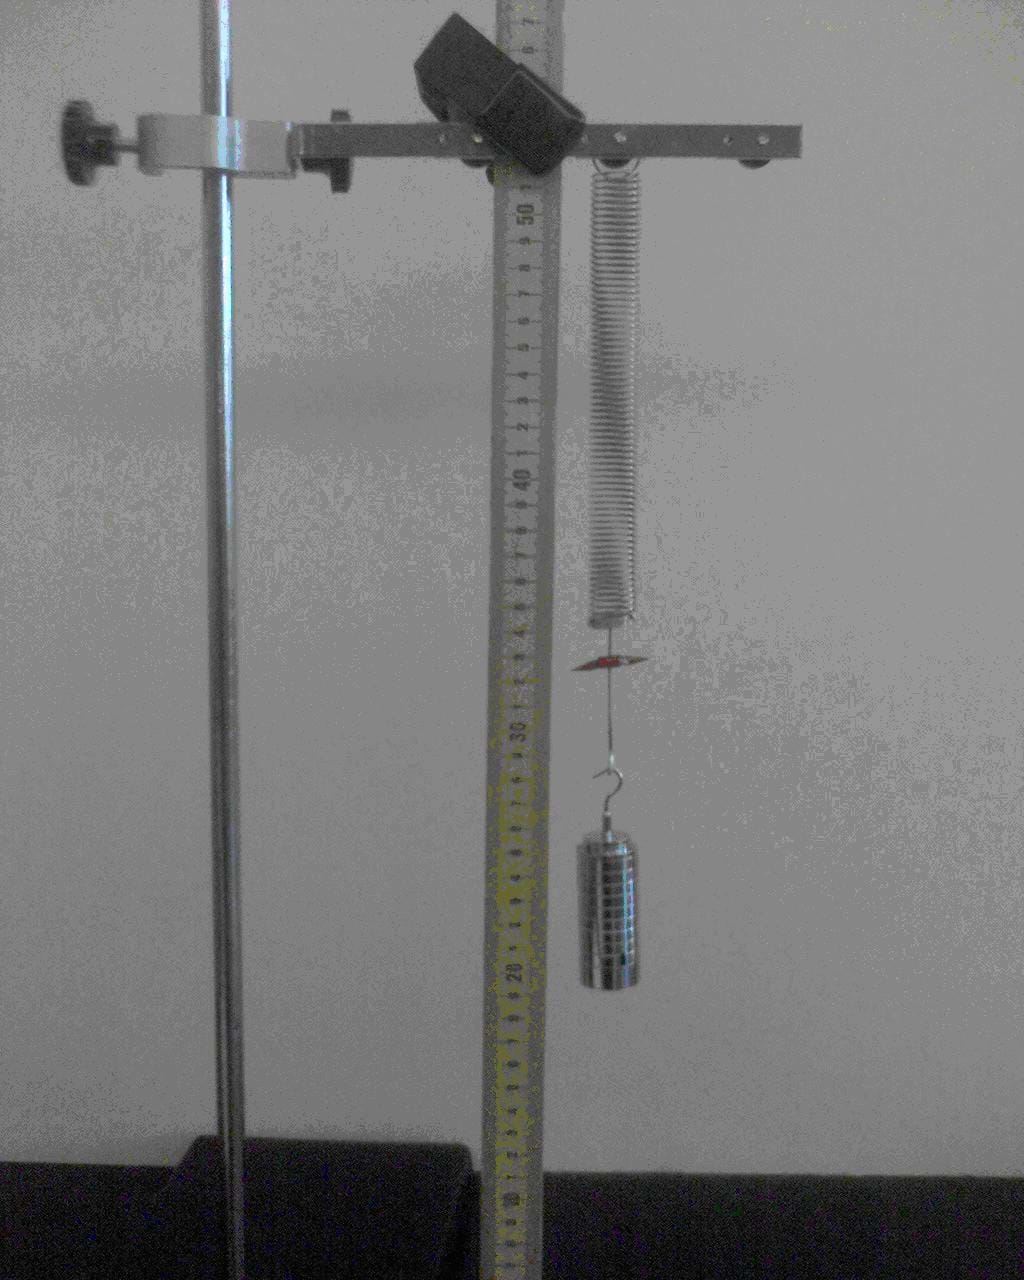 Photo shows a spring hanging from a lab stand with a vertical ruler positioned nearby.